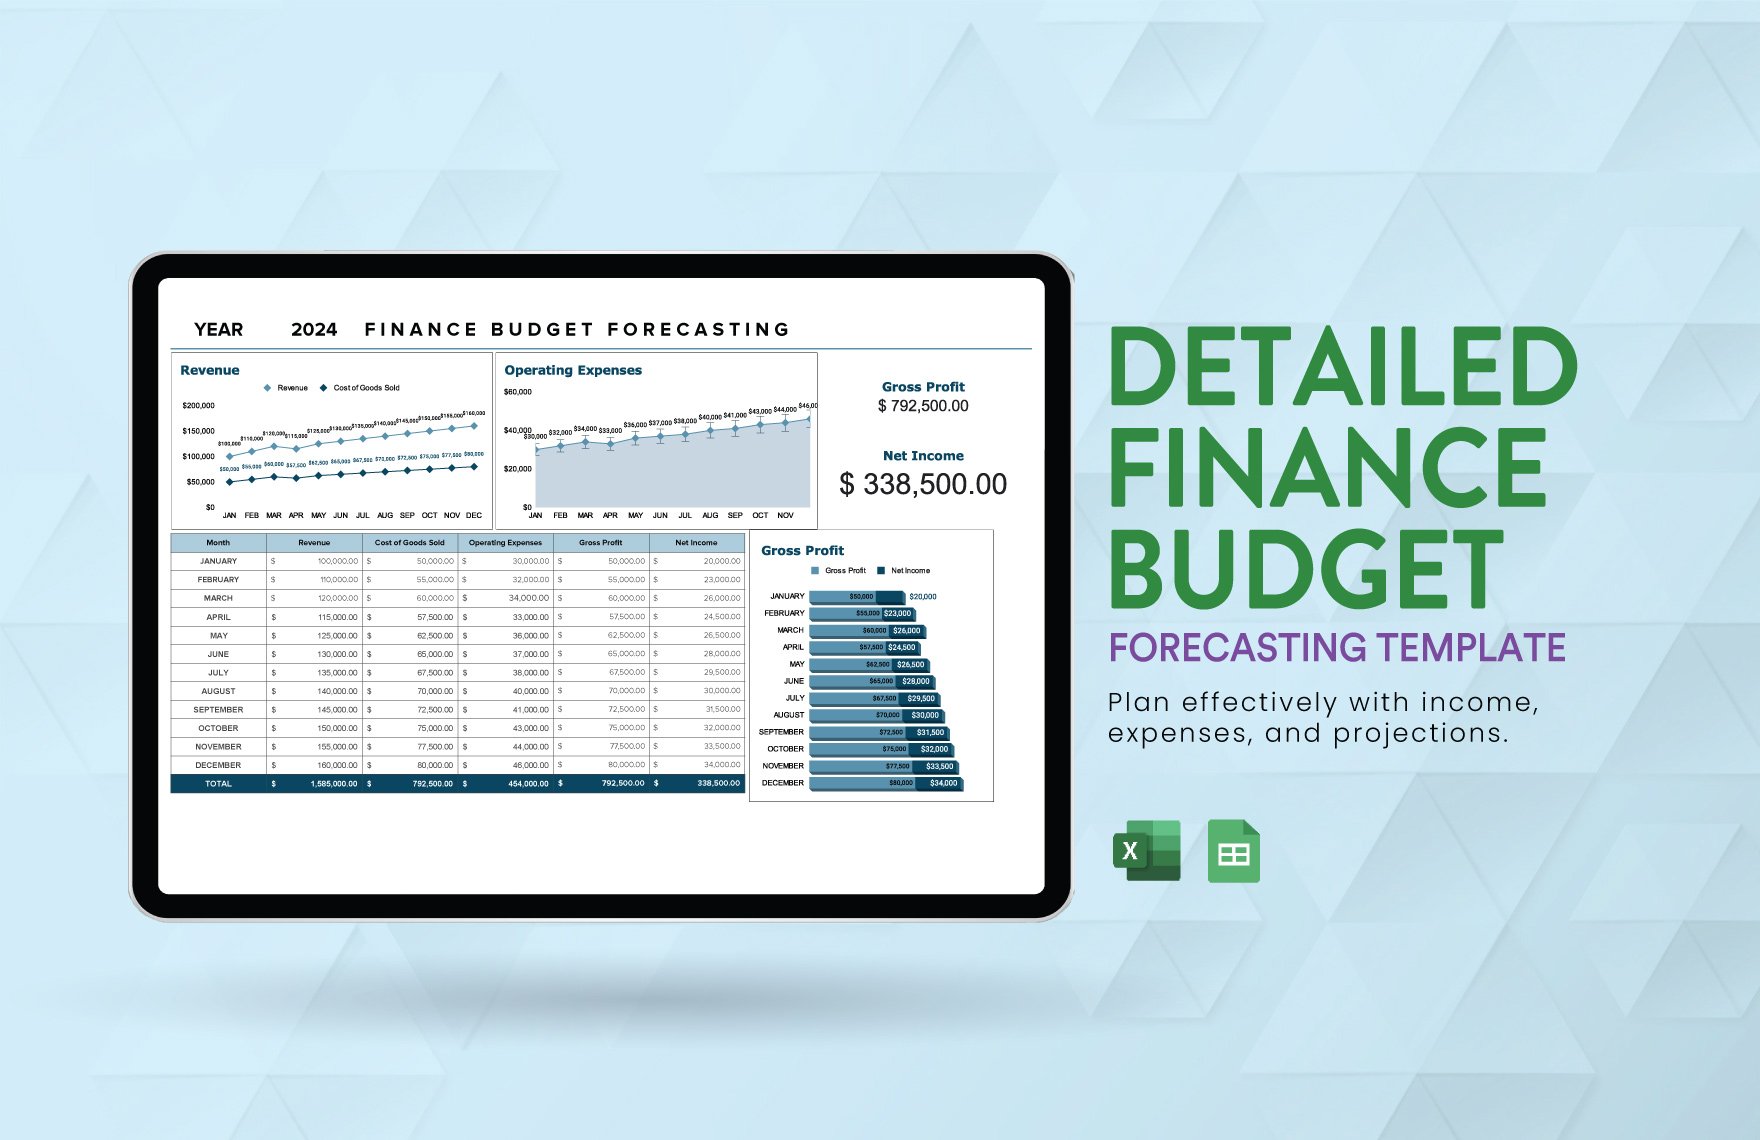 Detailed Finance Budget Forecasting Template in Excel, Google Sheets